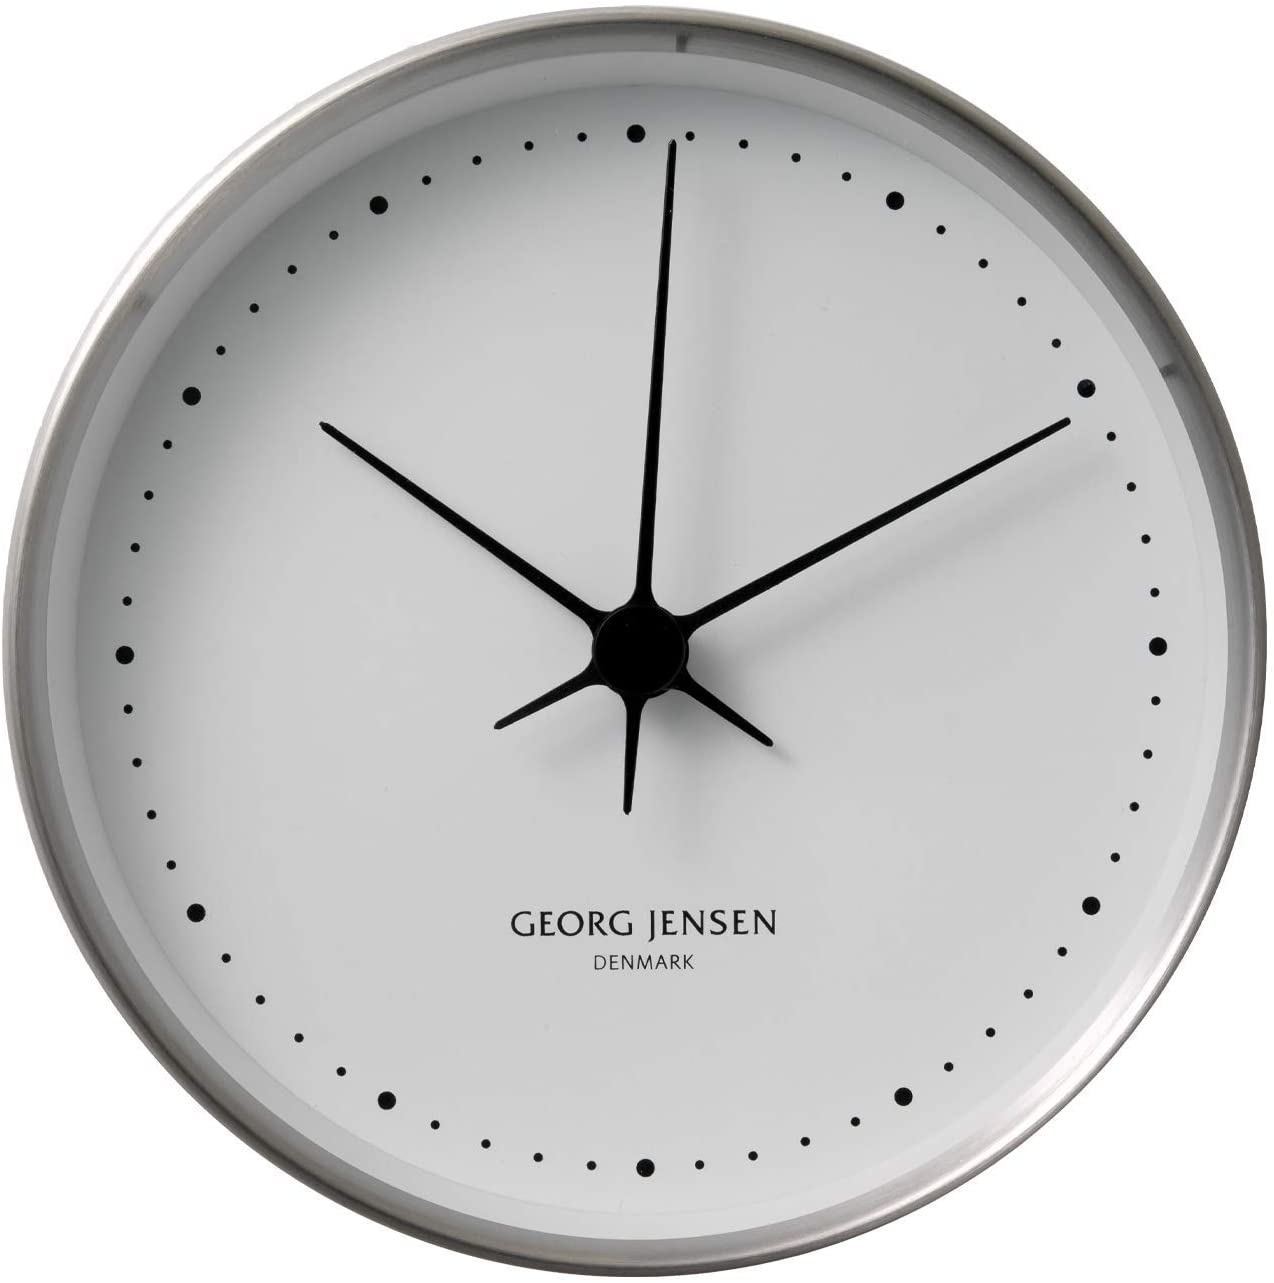 Georg Jensen Henning Koppel Stainless Steel Wall Clock with White Dial